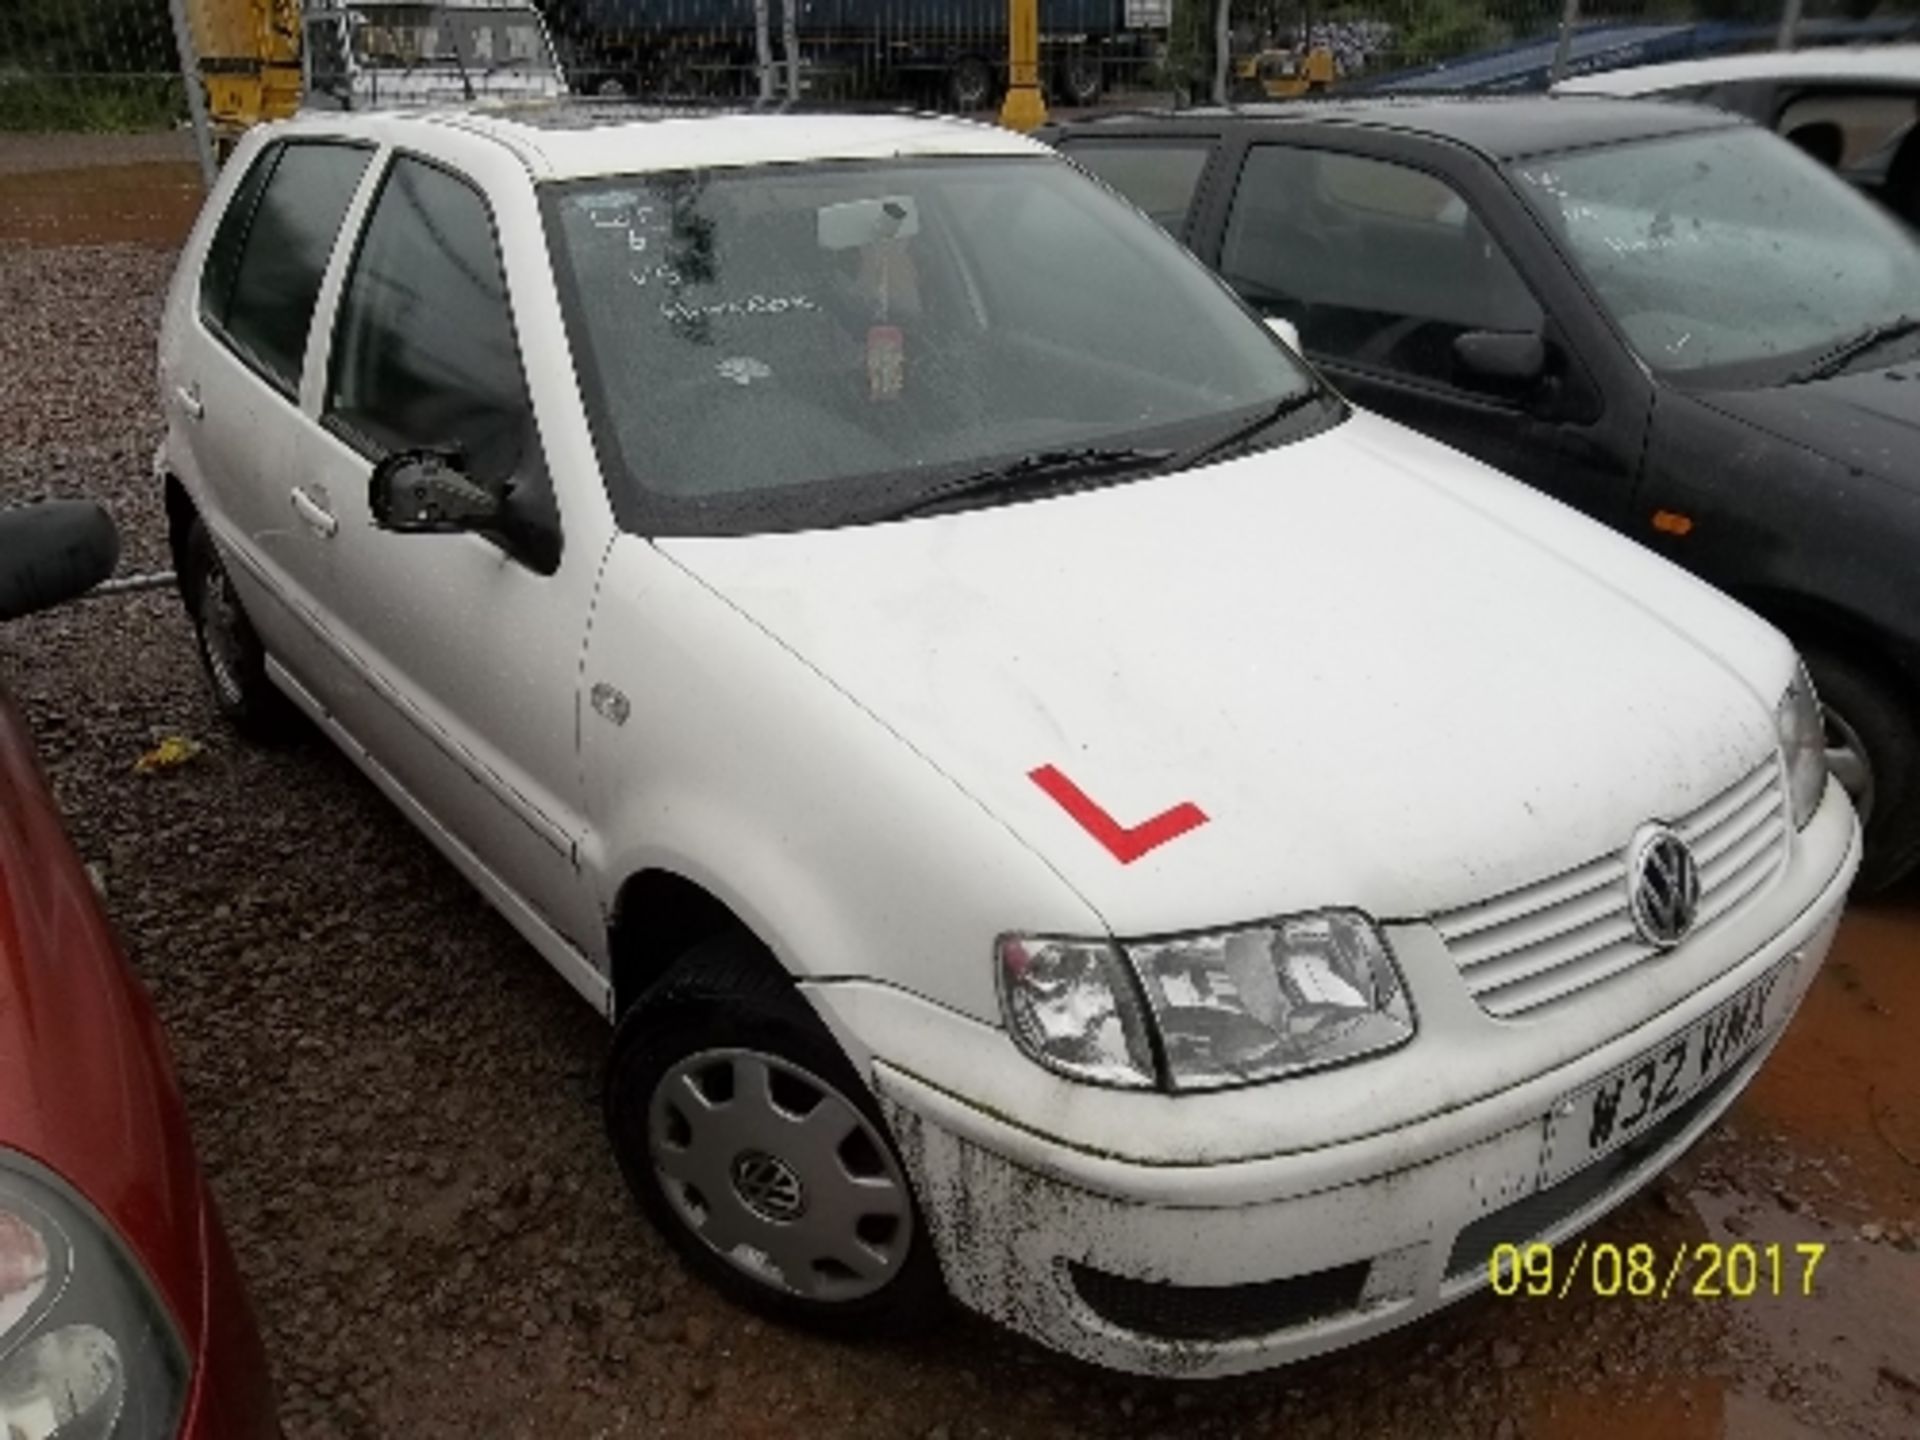 Volkswagen Polo S - W32 VMX Date of registration: 15.06.2000 1400cc, petrol, manual, white - Image 2 of 4